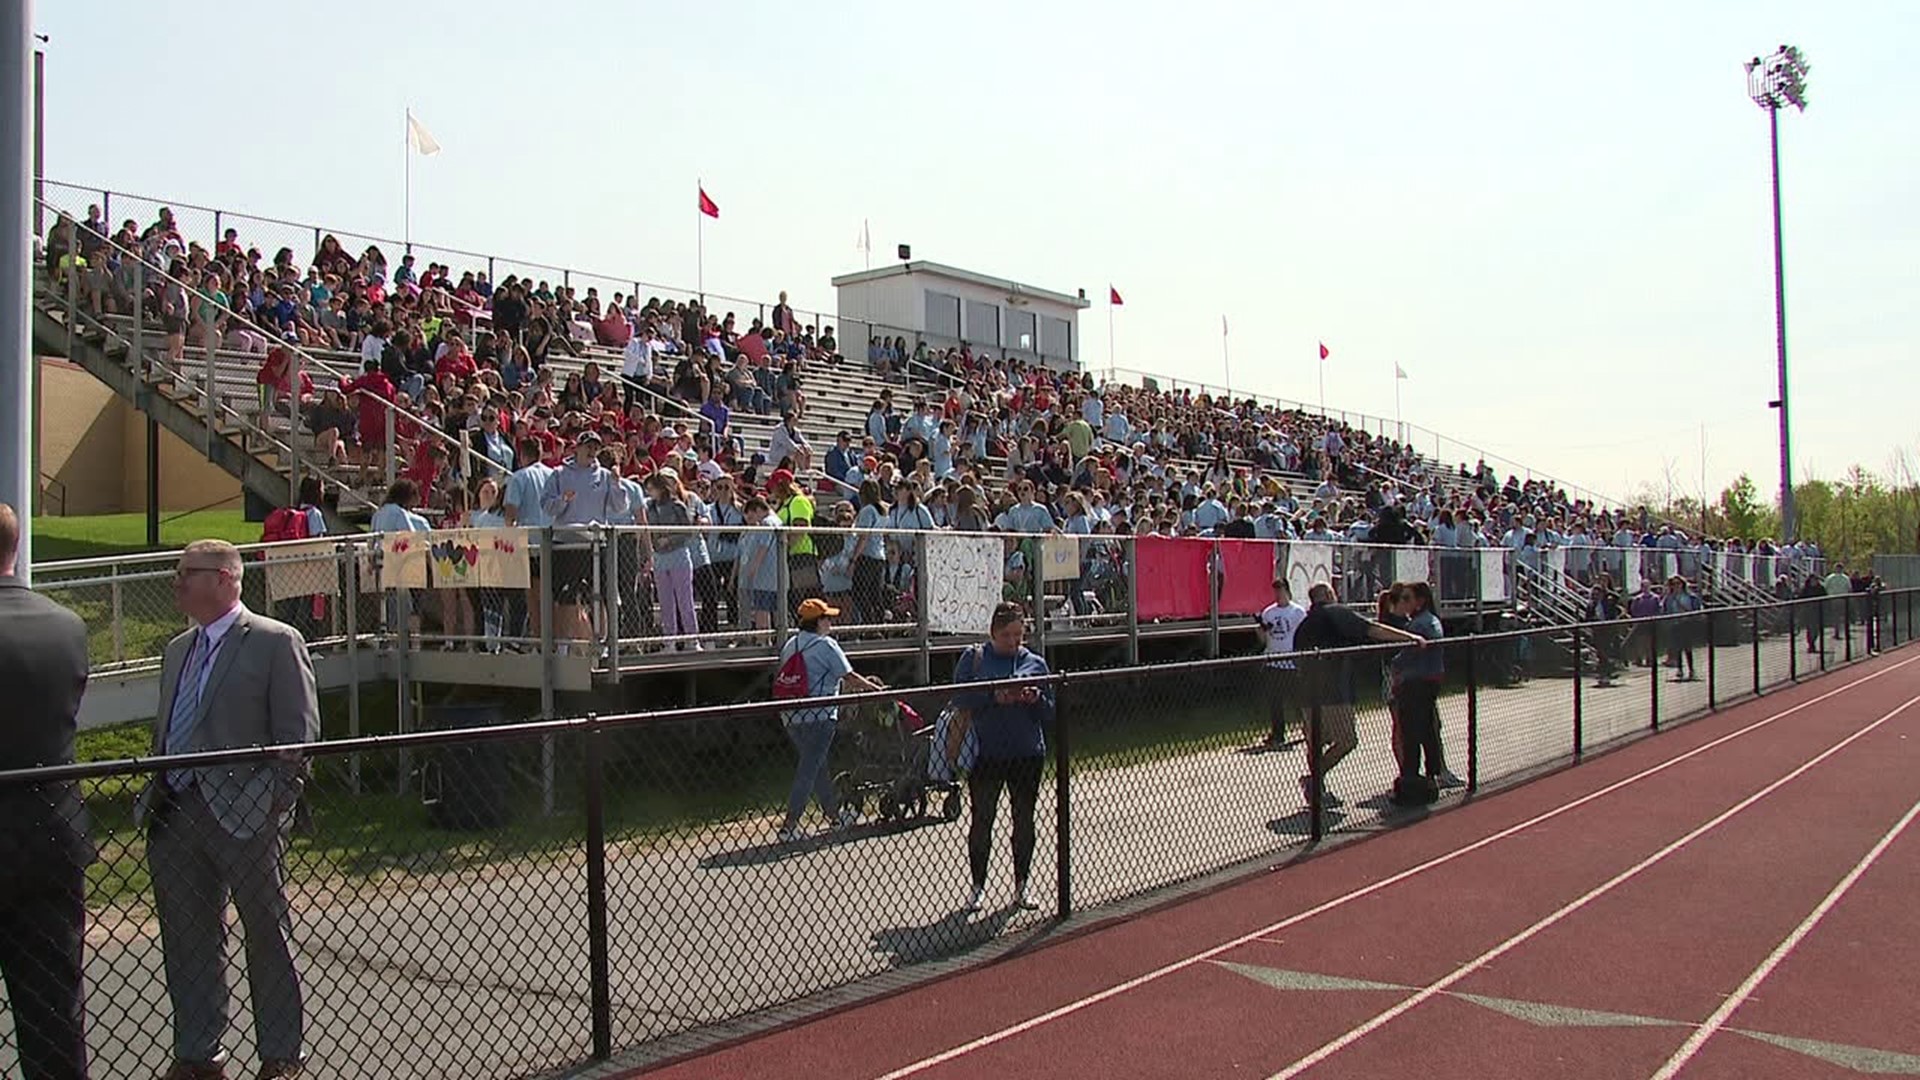 For the first time since the pandemic, about 500 athletes from more than a dozen school districts participated in the annual Special Olympics Track and Field event.